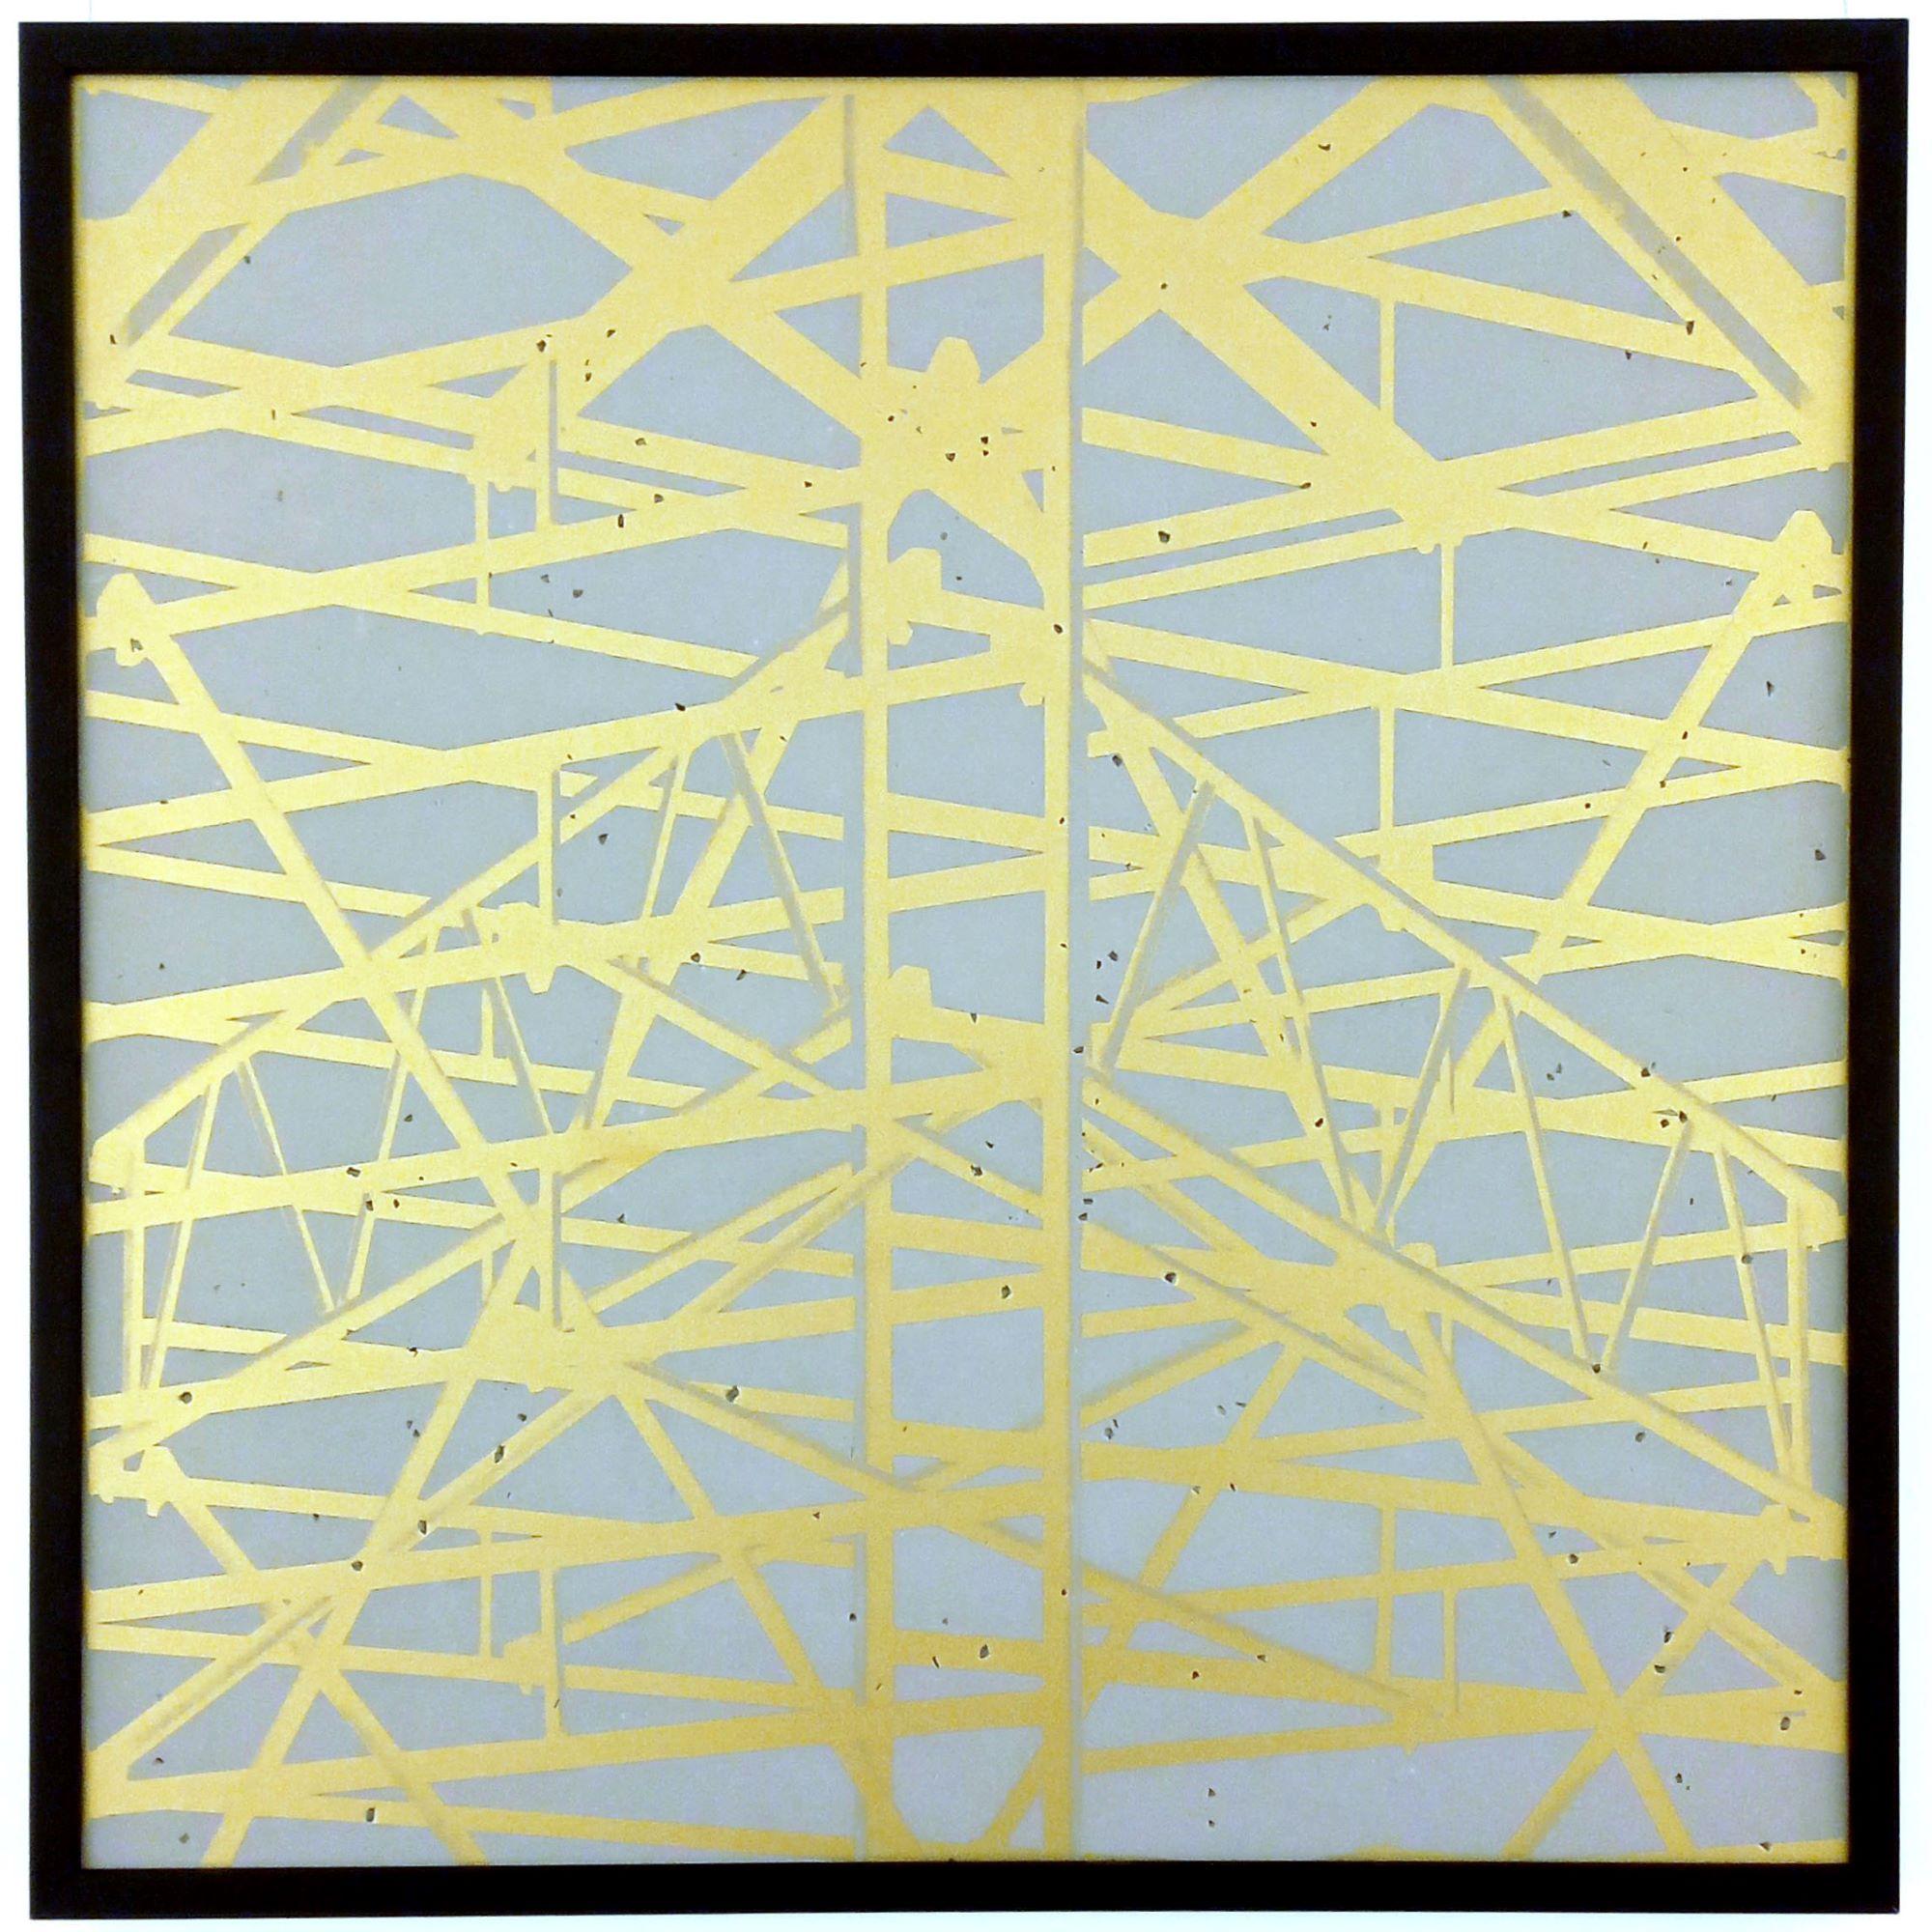 Concrete Scaffolding 02 is a limited-edition photograph by contemporary artist Bruno Fontana. This photograph is a screen printing with gold ink on concrete stoneware. Dimensions are 60 x 60 cm (23.6 × 23.6 in). The artwork is sold with a black